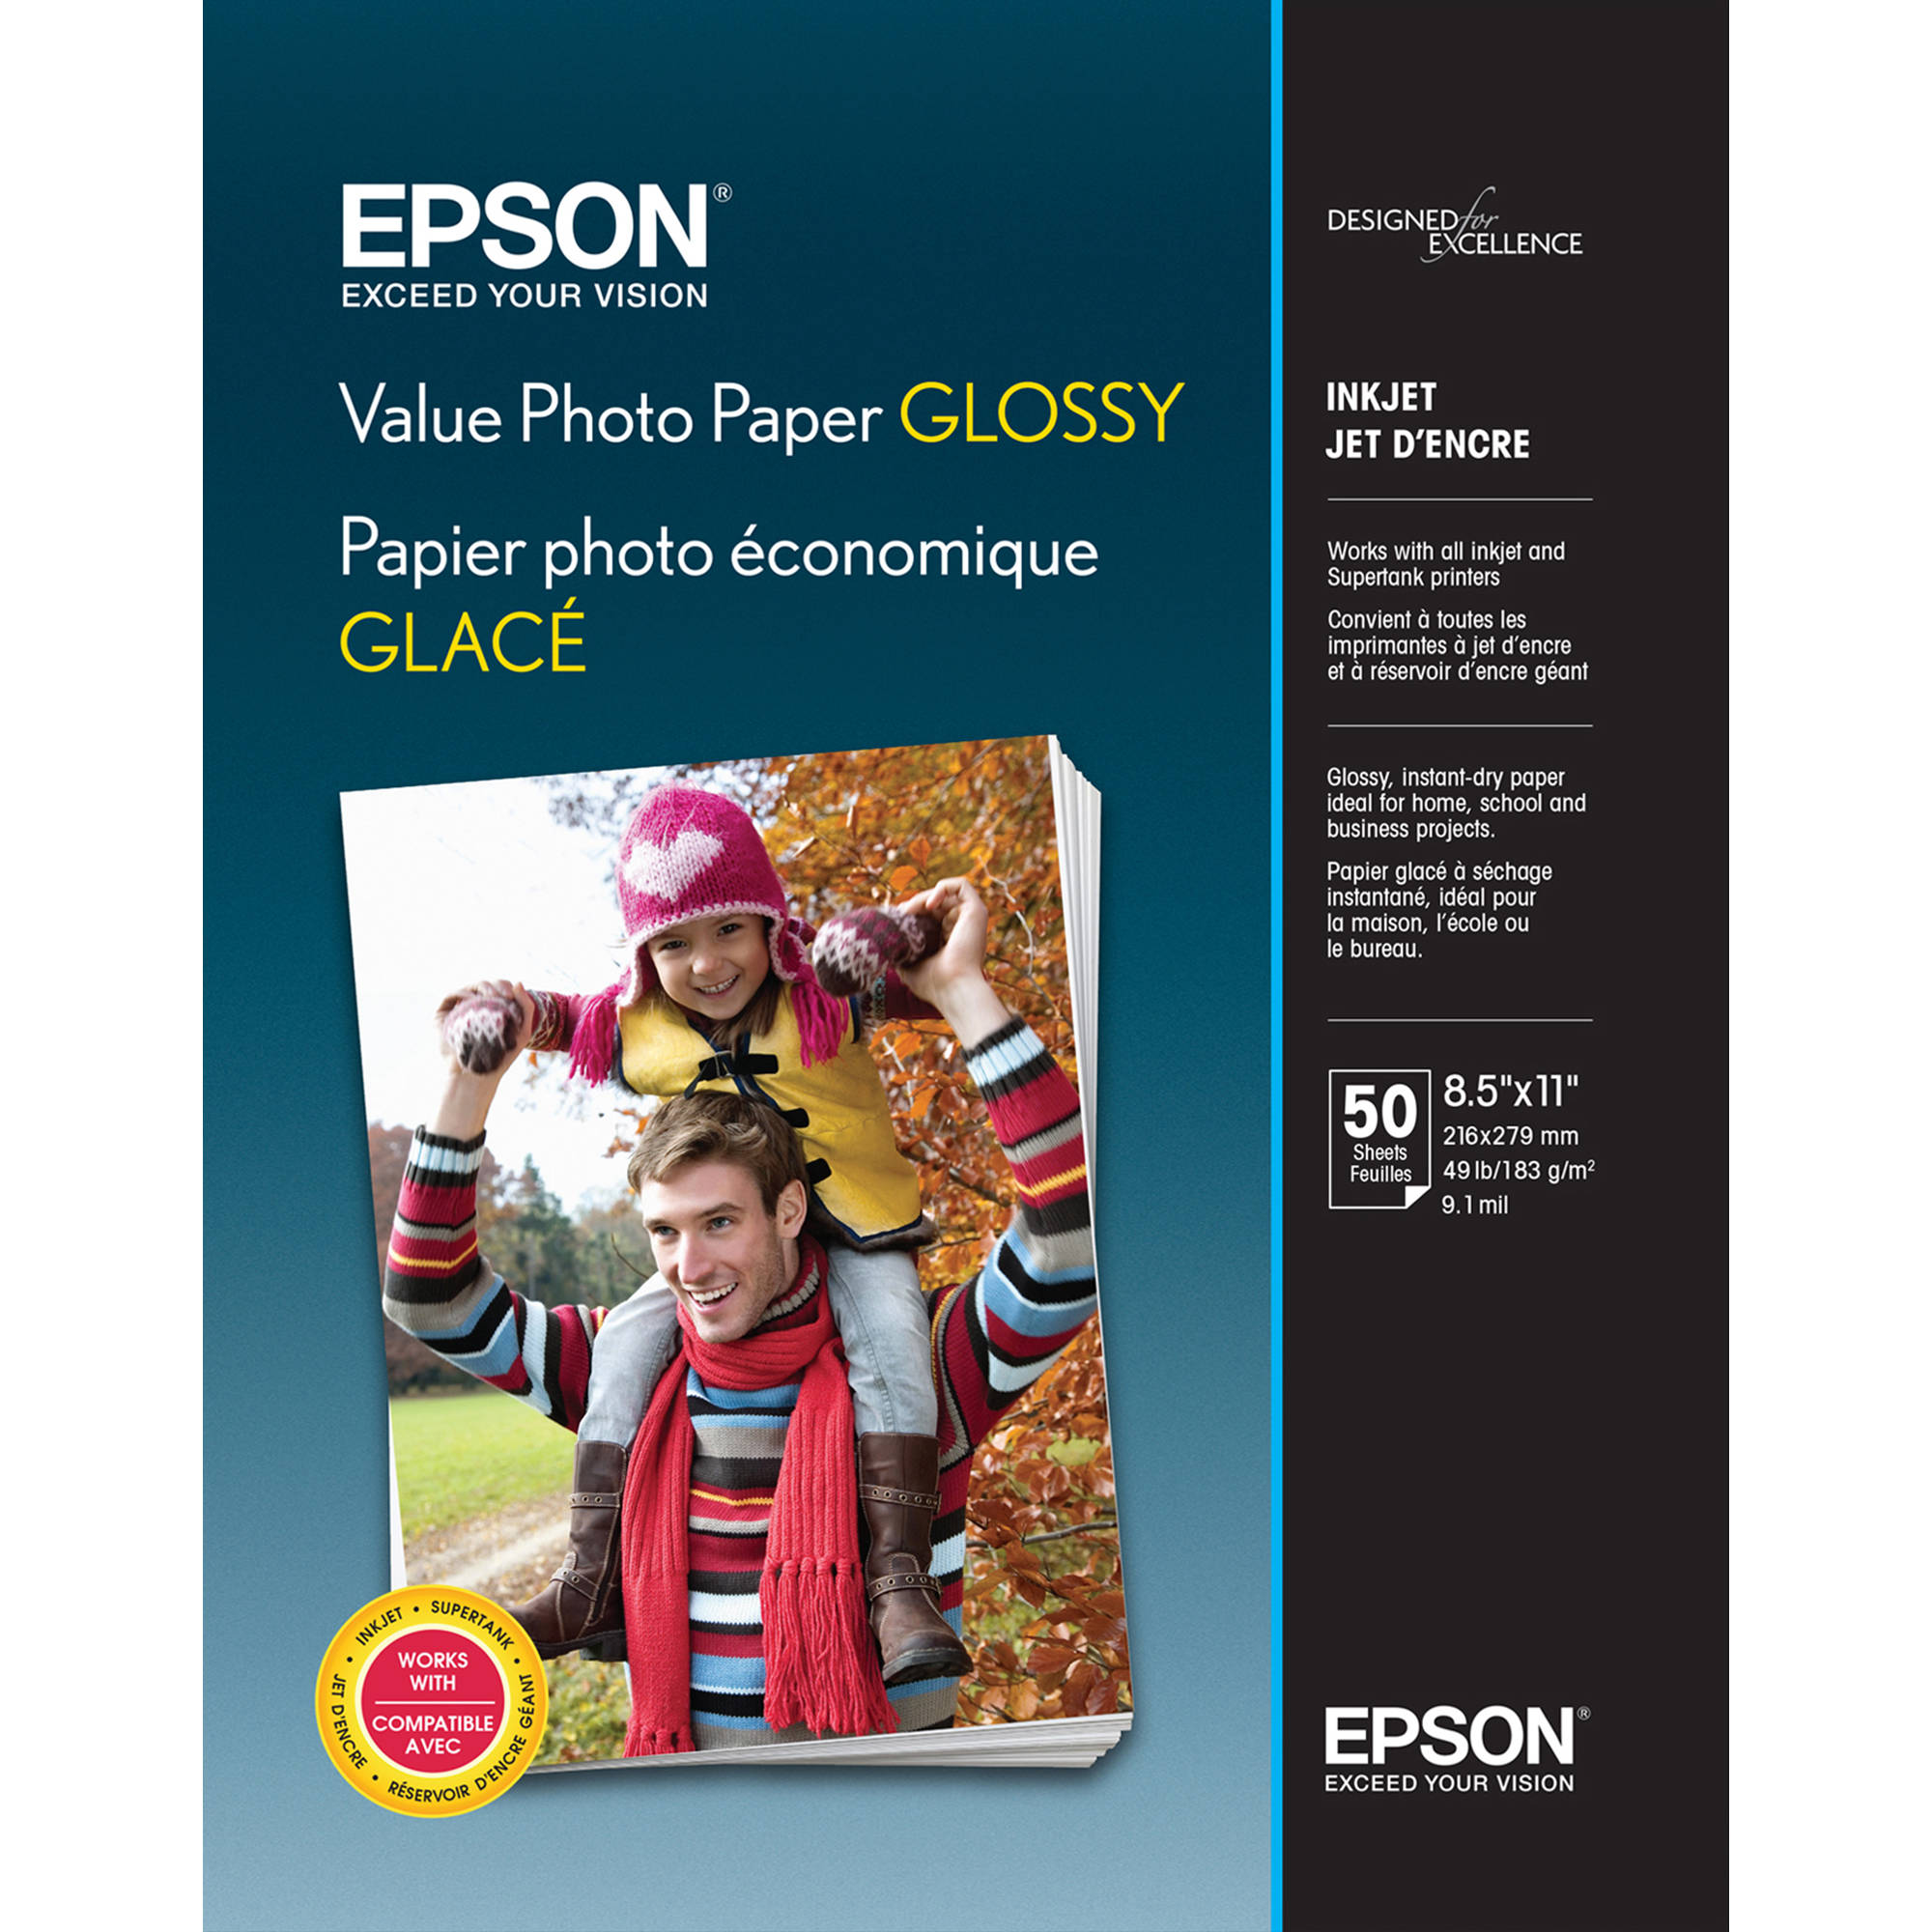 Epson Value Photo Paper Glossy (8.5 x 11", 50 Sheets)